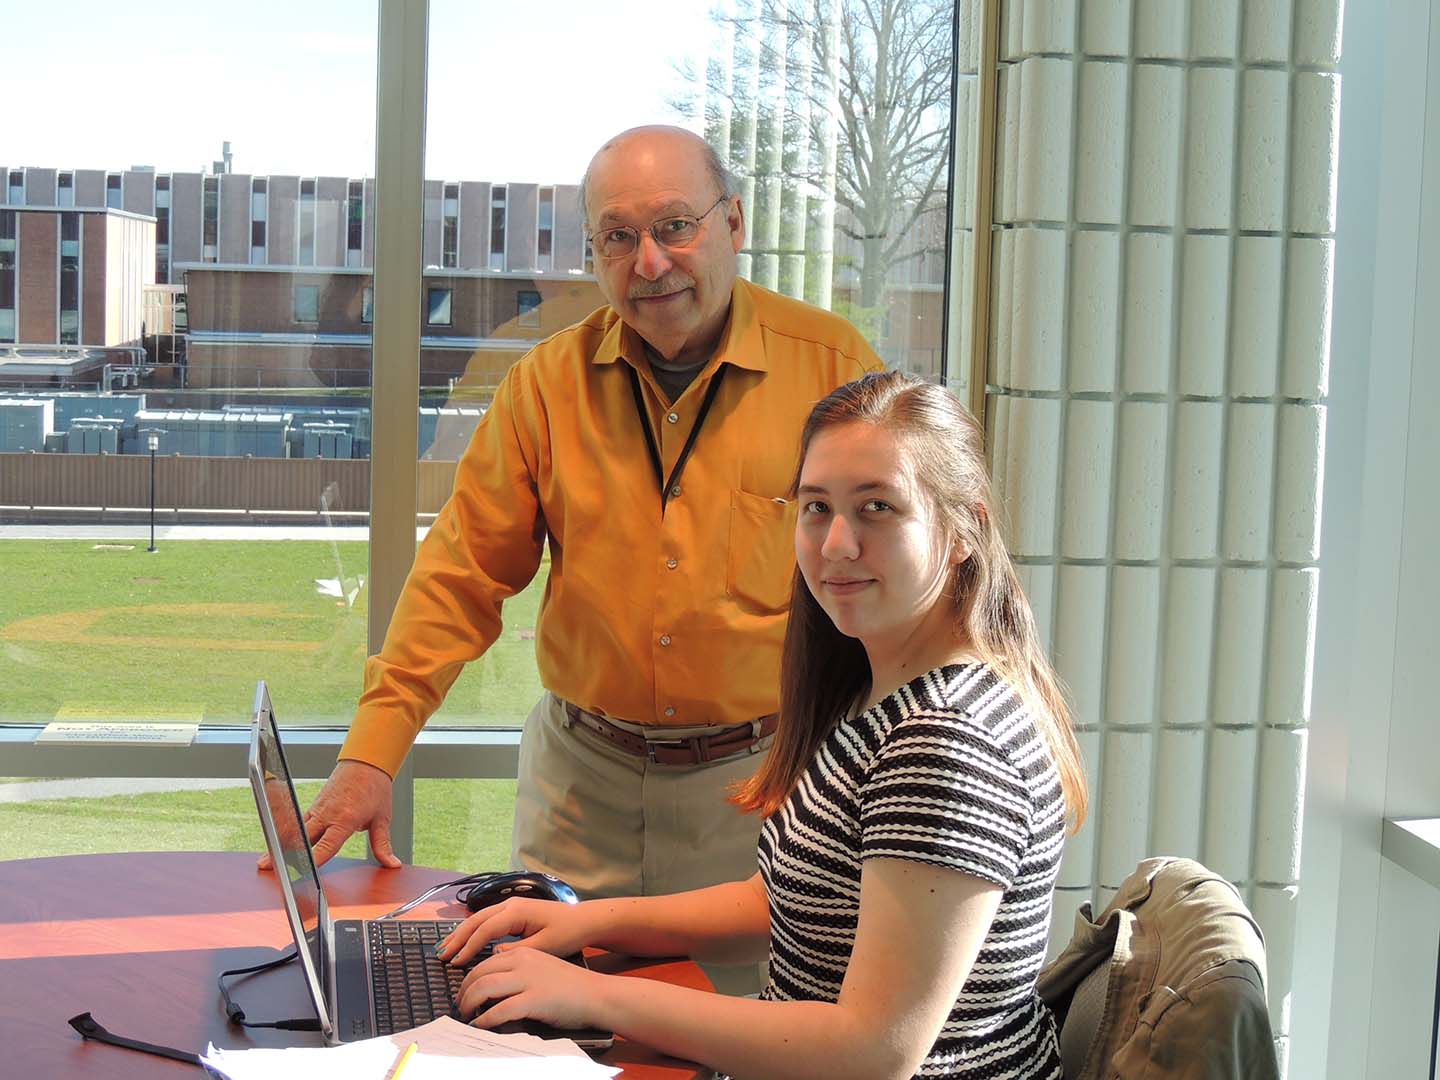 ASPIRE intern and Centennial High School Student Kelly White works with her mentor Mario Stalker of Johns Hopkins APL